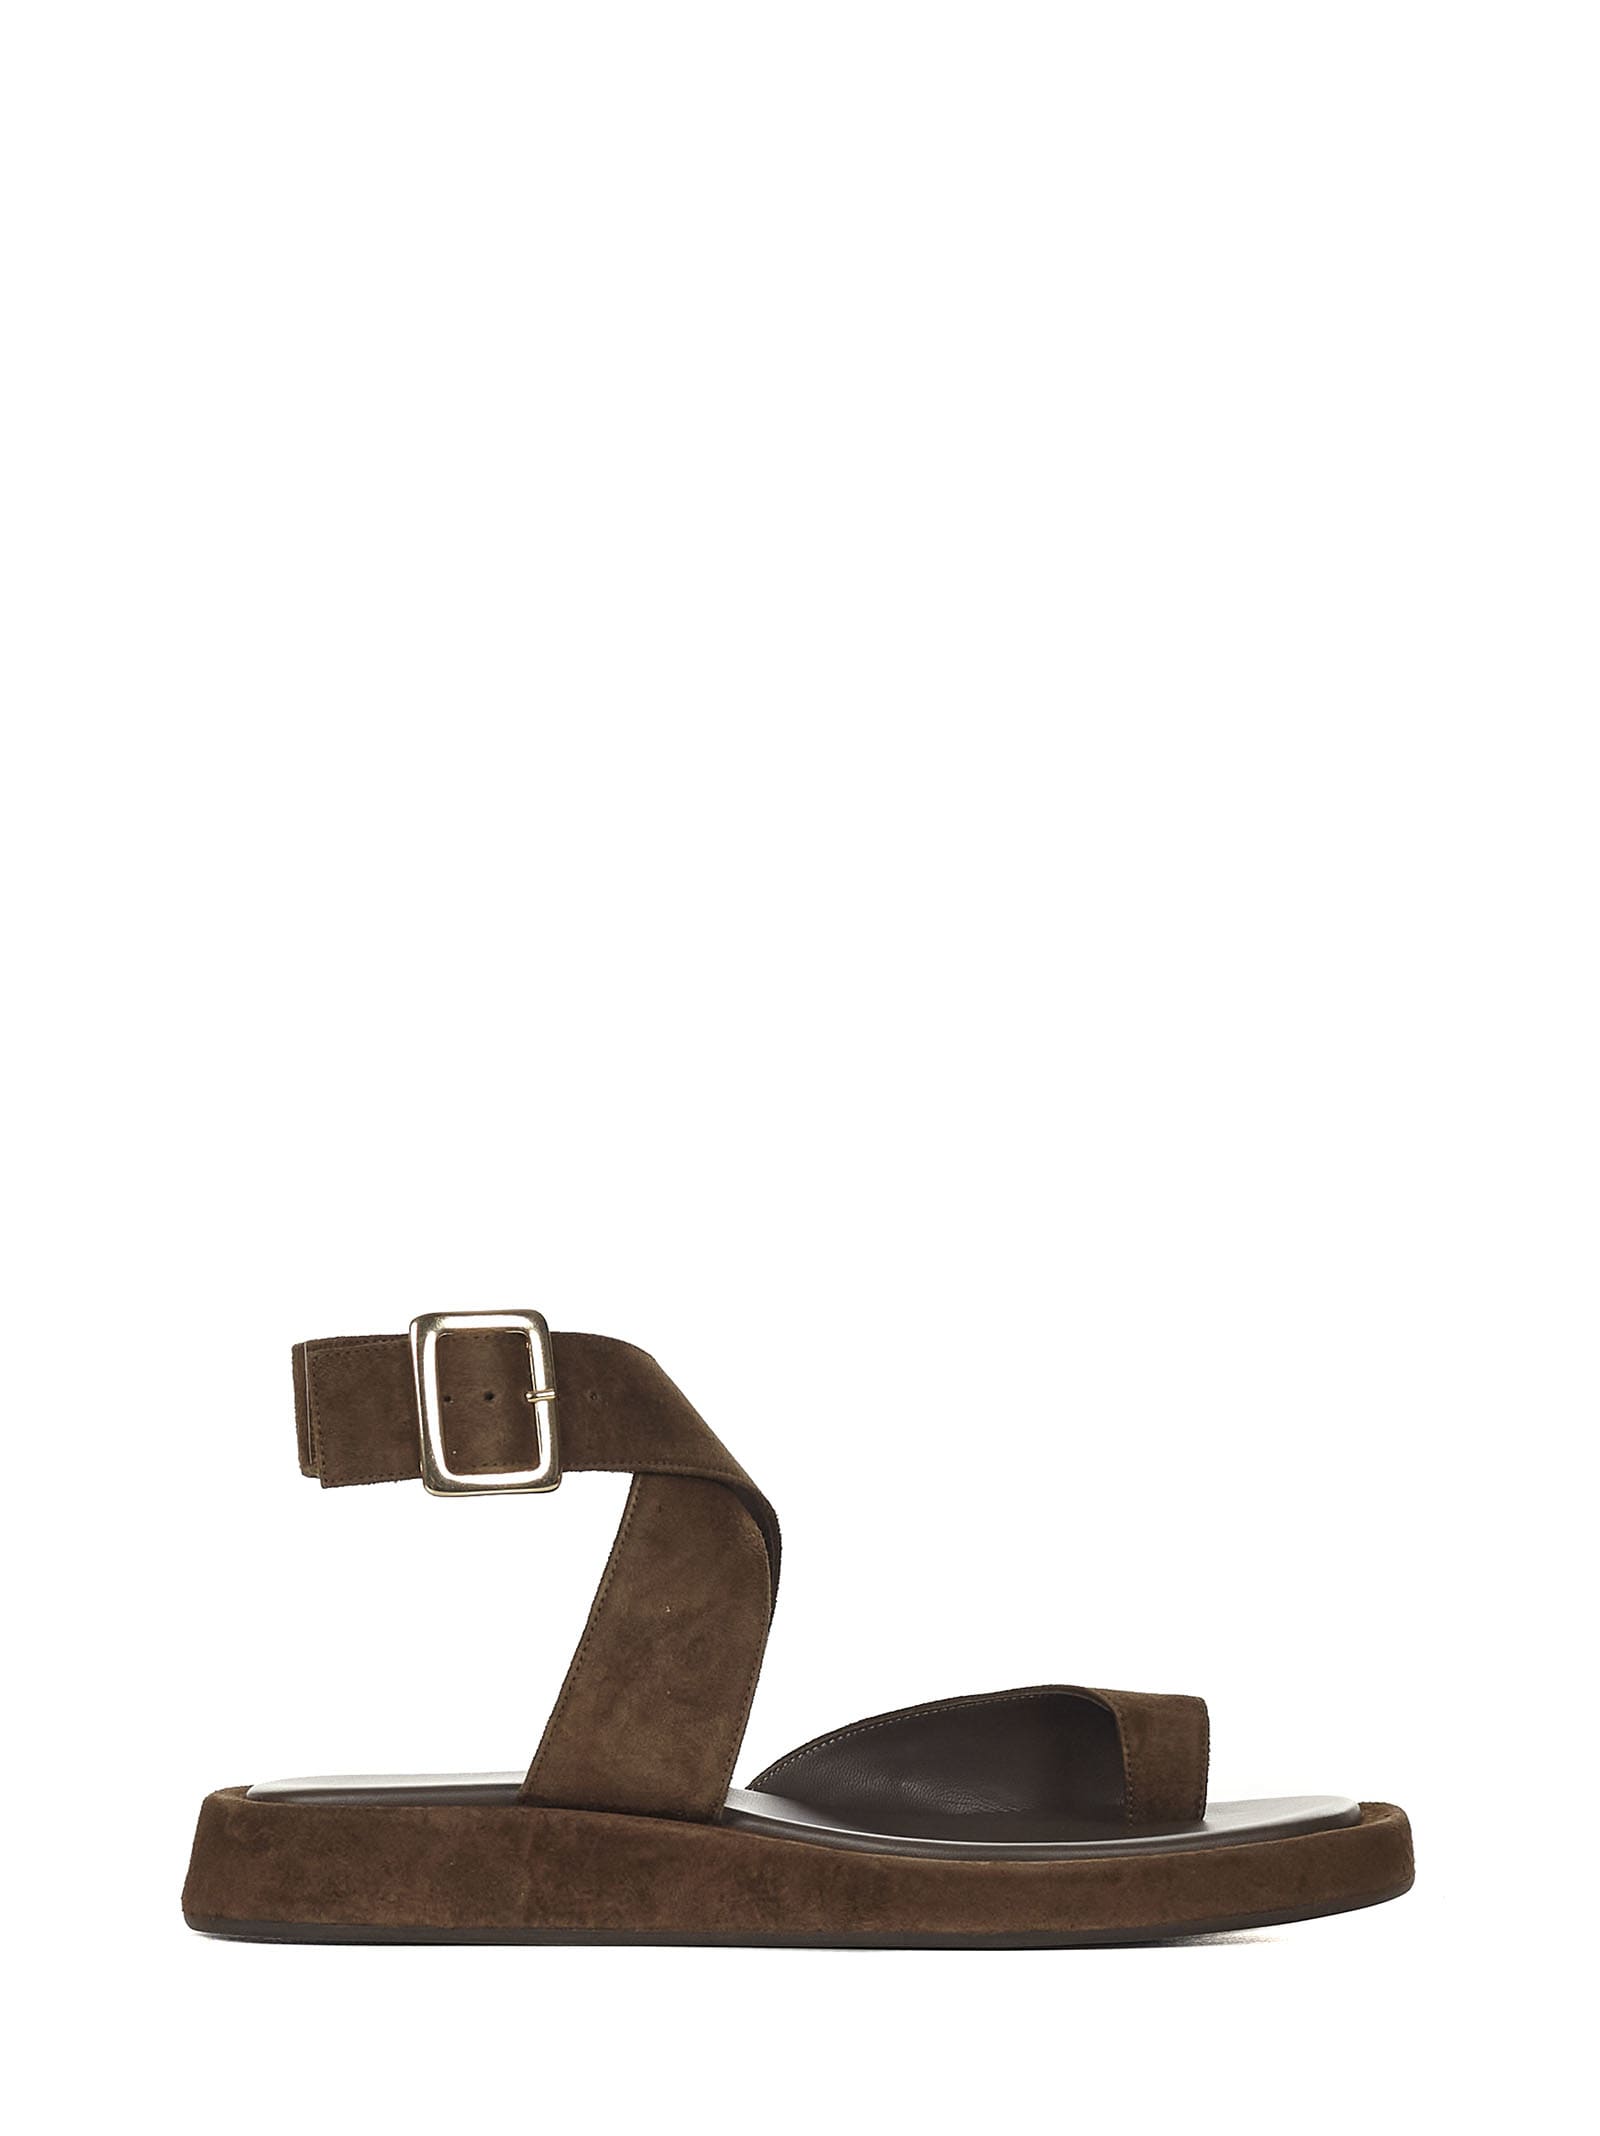 Gia Couture/rhw Rosie 4 Sandals